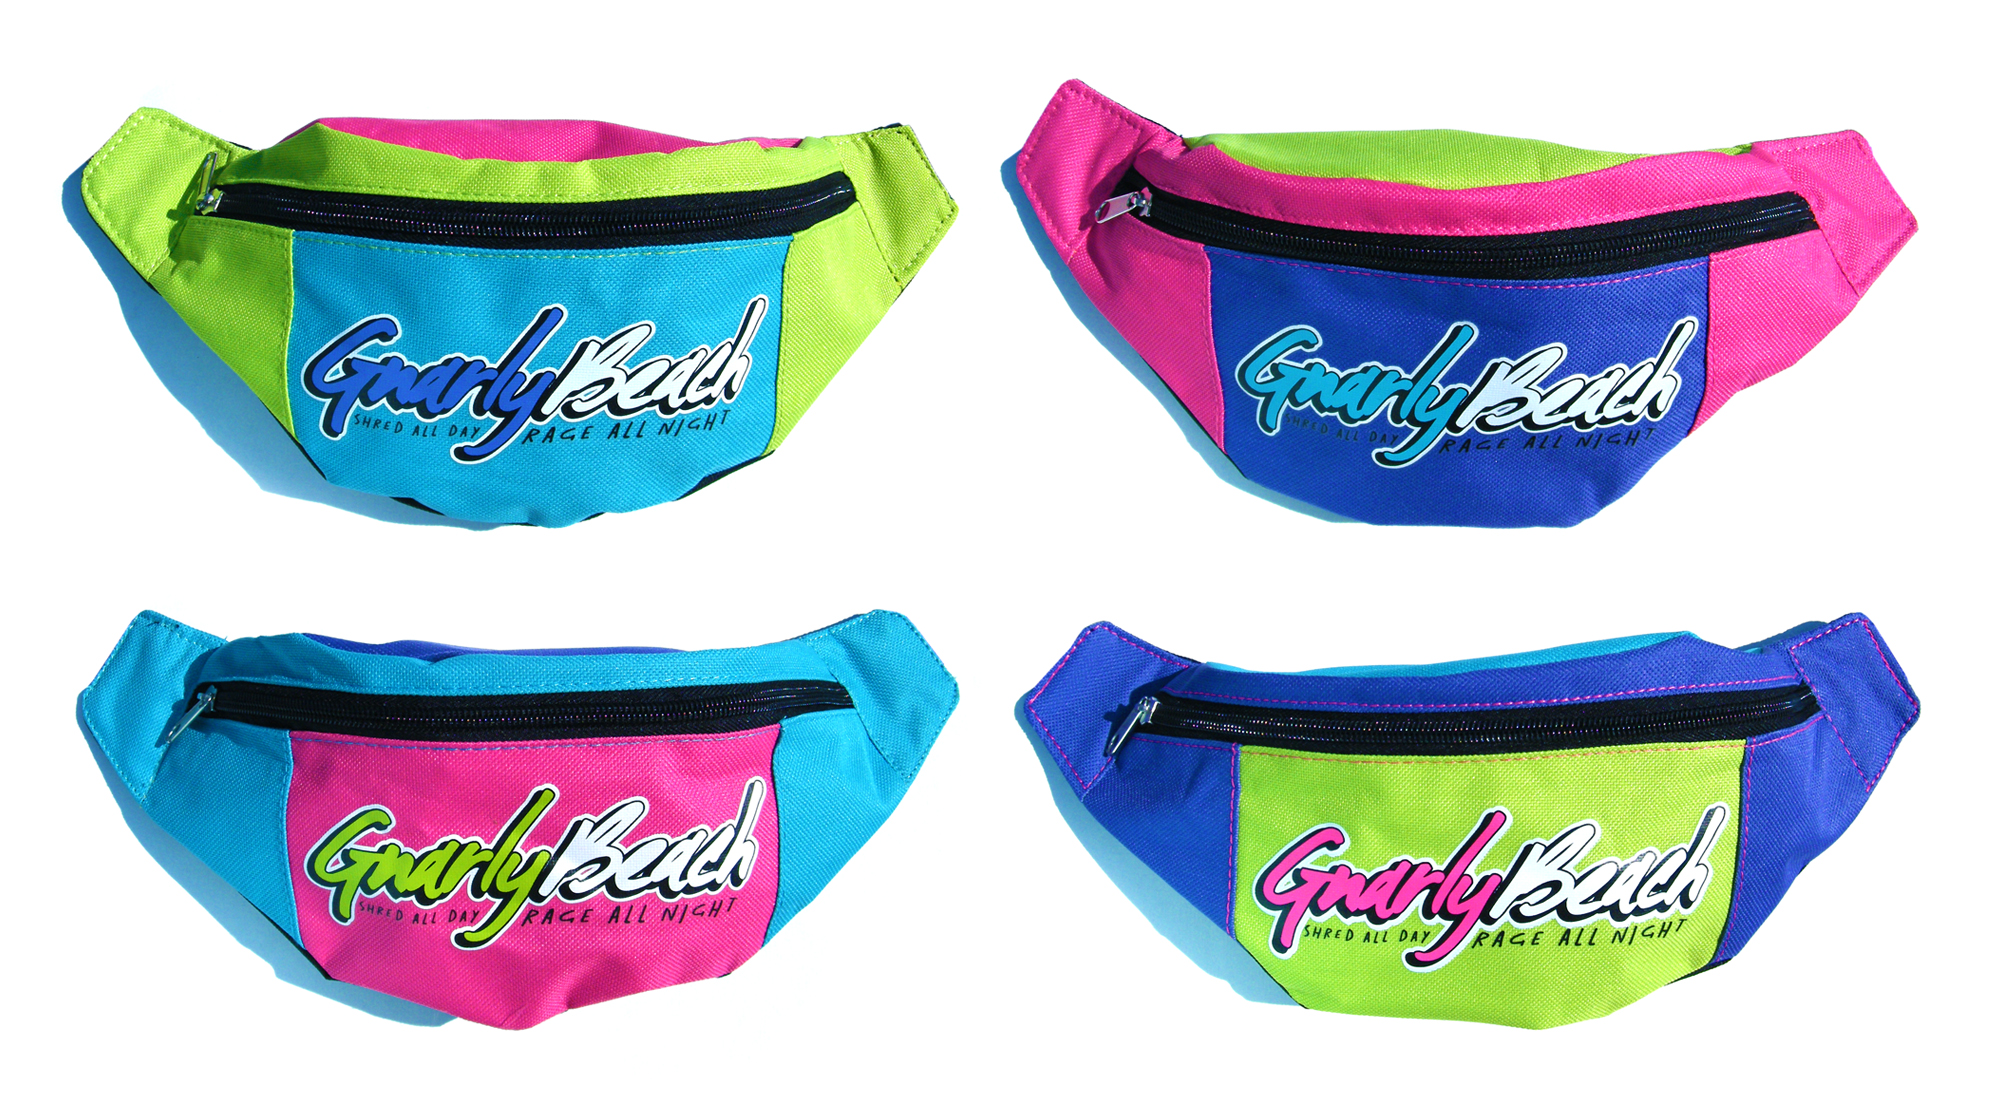 gnarly beach, lifestyle brands, fanny pack, neon, beach wear, festival clothing, party pack, beach wear, california clothing, gnarly pouch